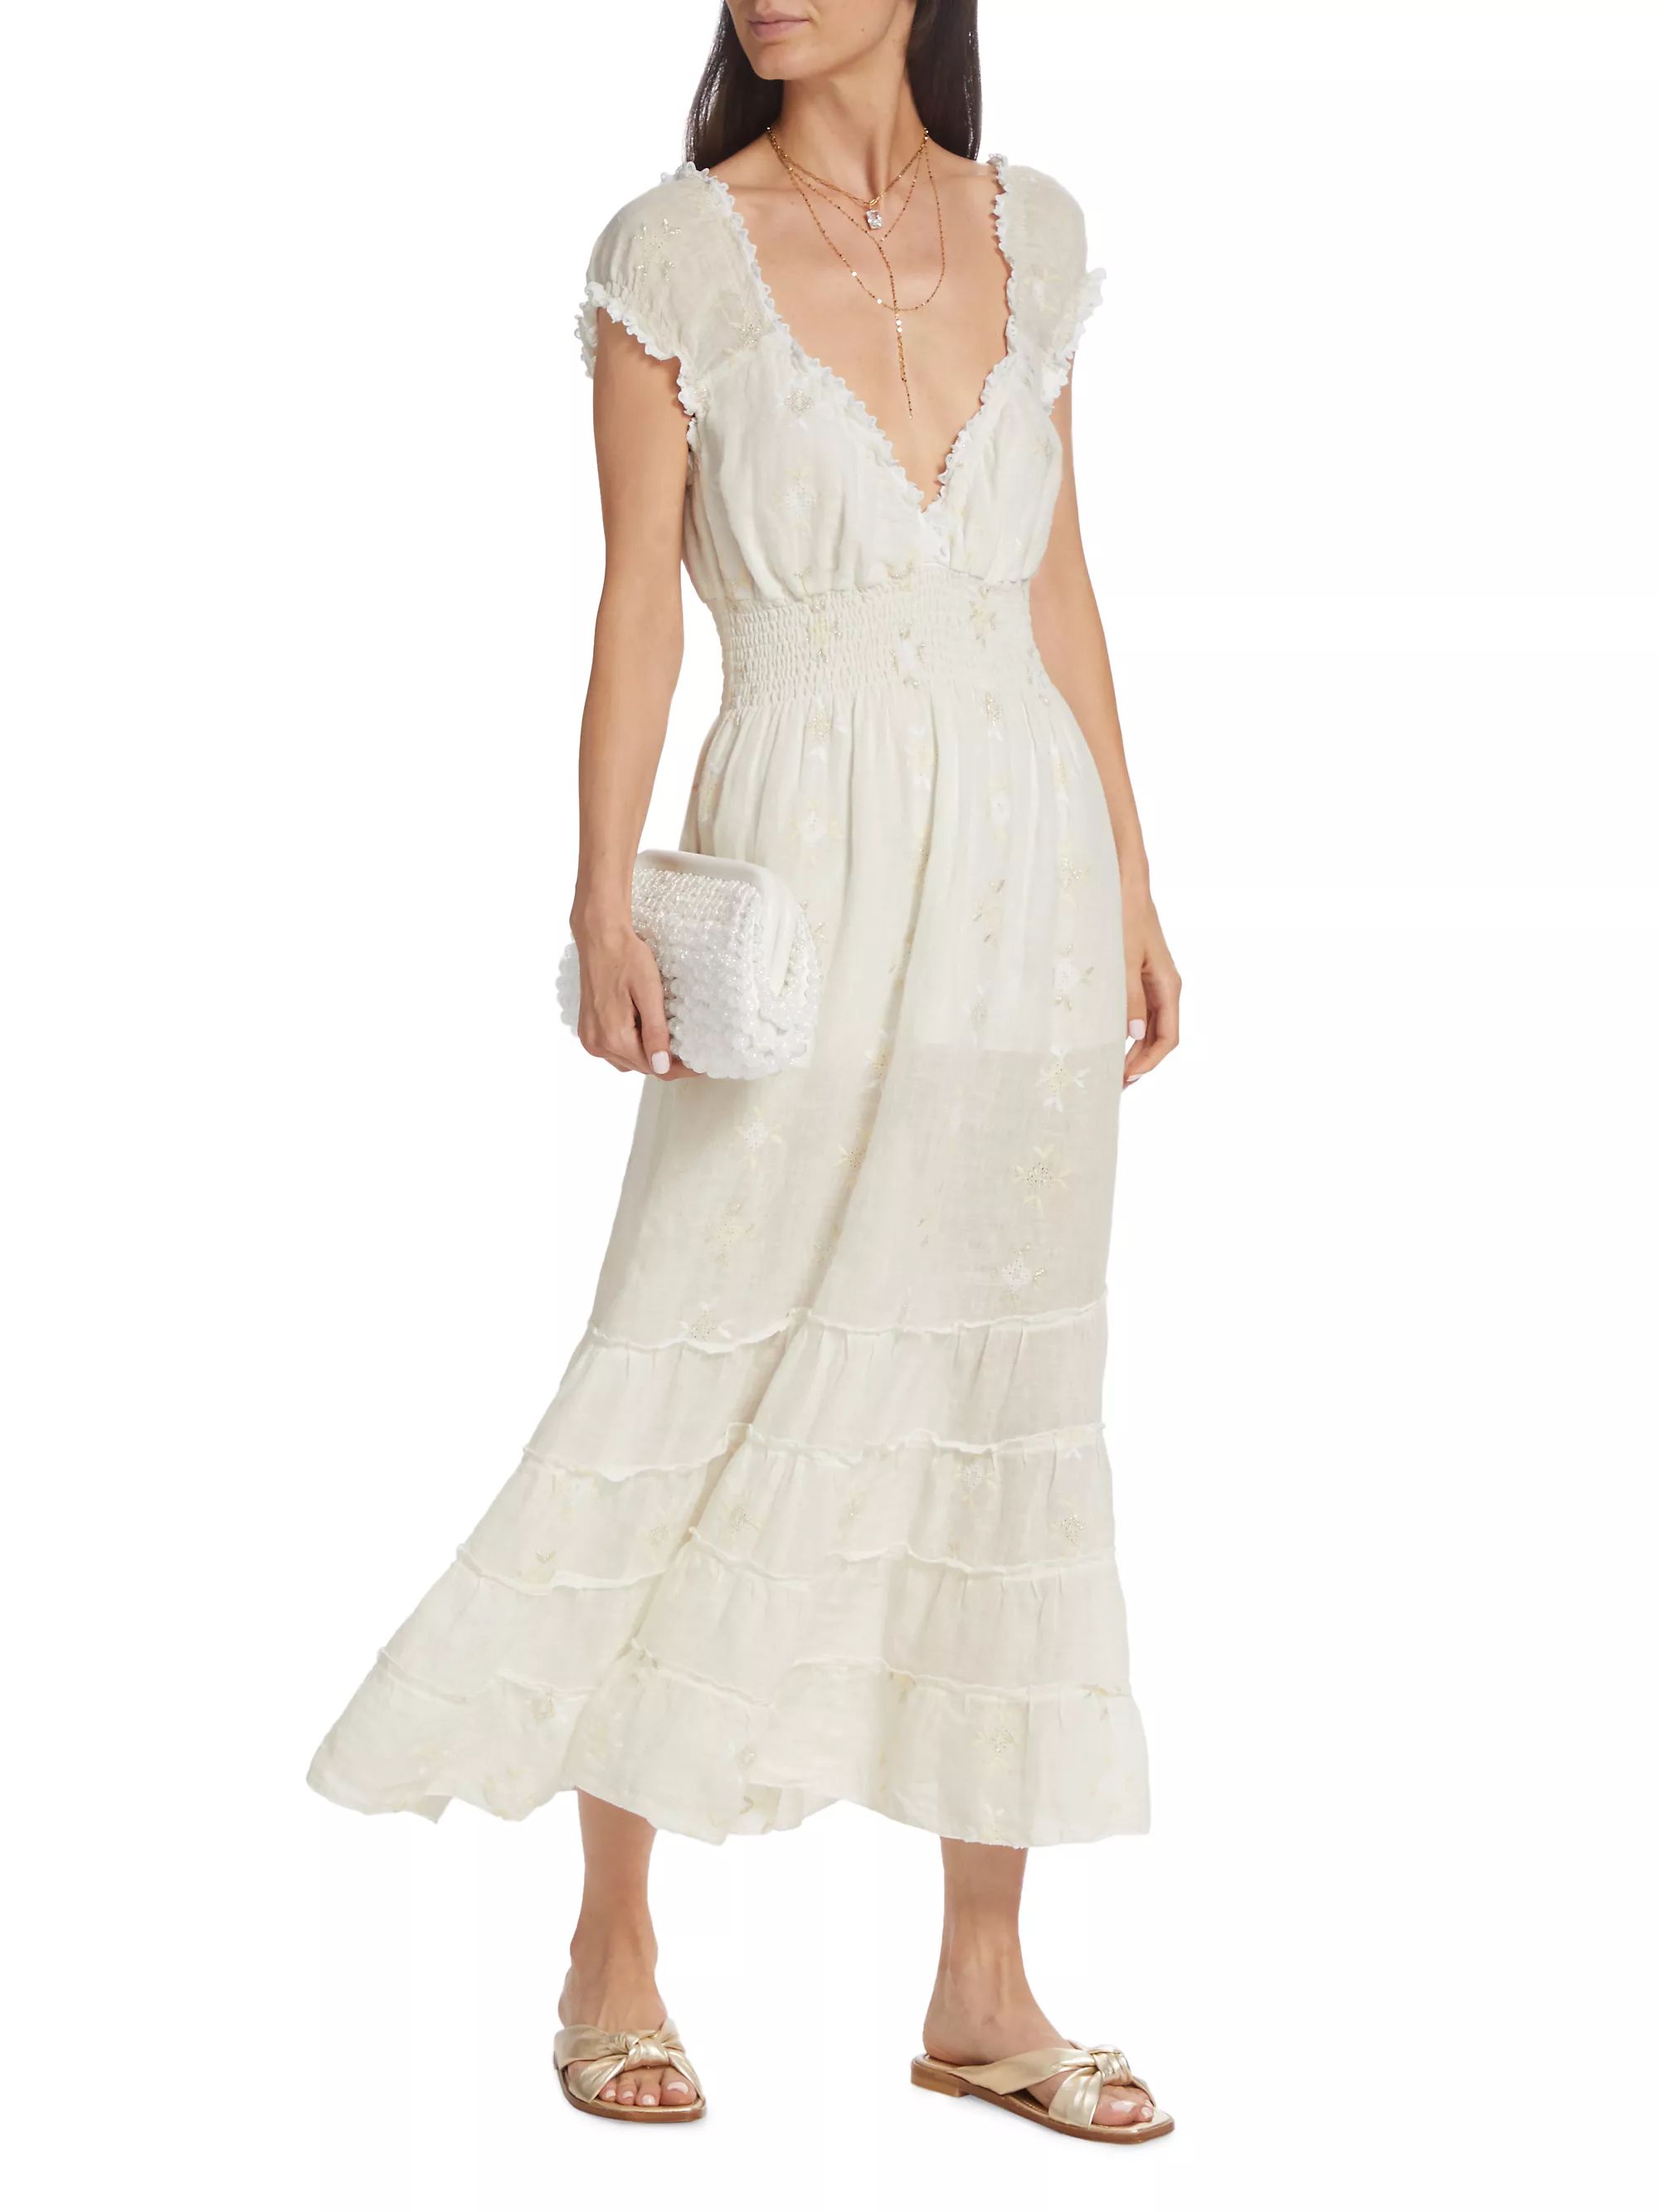 DressesDay & CasualQueen ModaZefiro Tiered Midi Dress$415Color NaturalSizeSize Guideselect sizeSm... | Saks Fifth Avenue